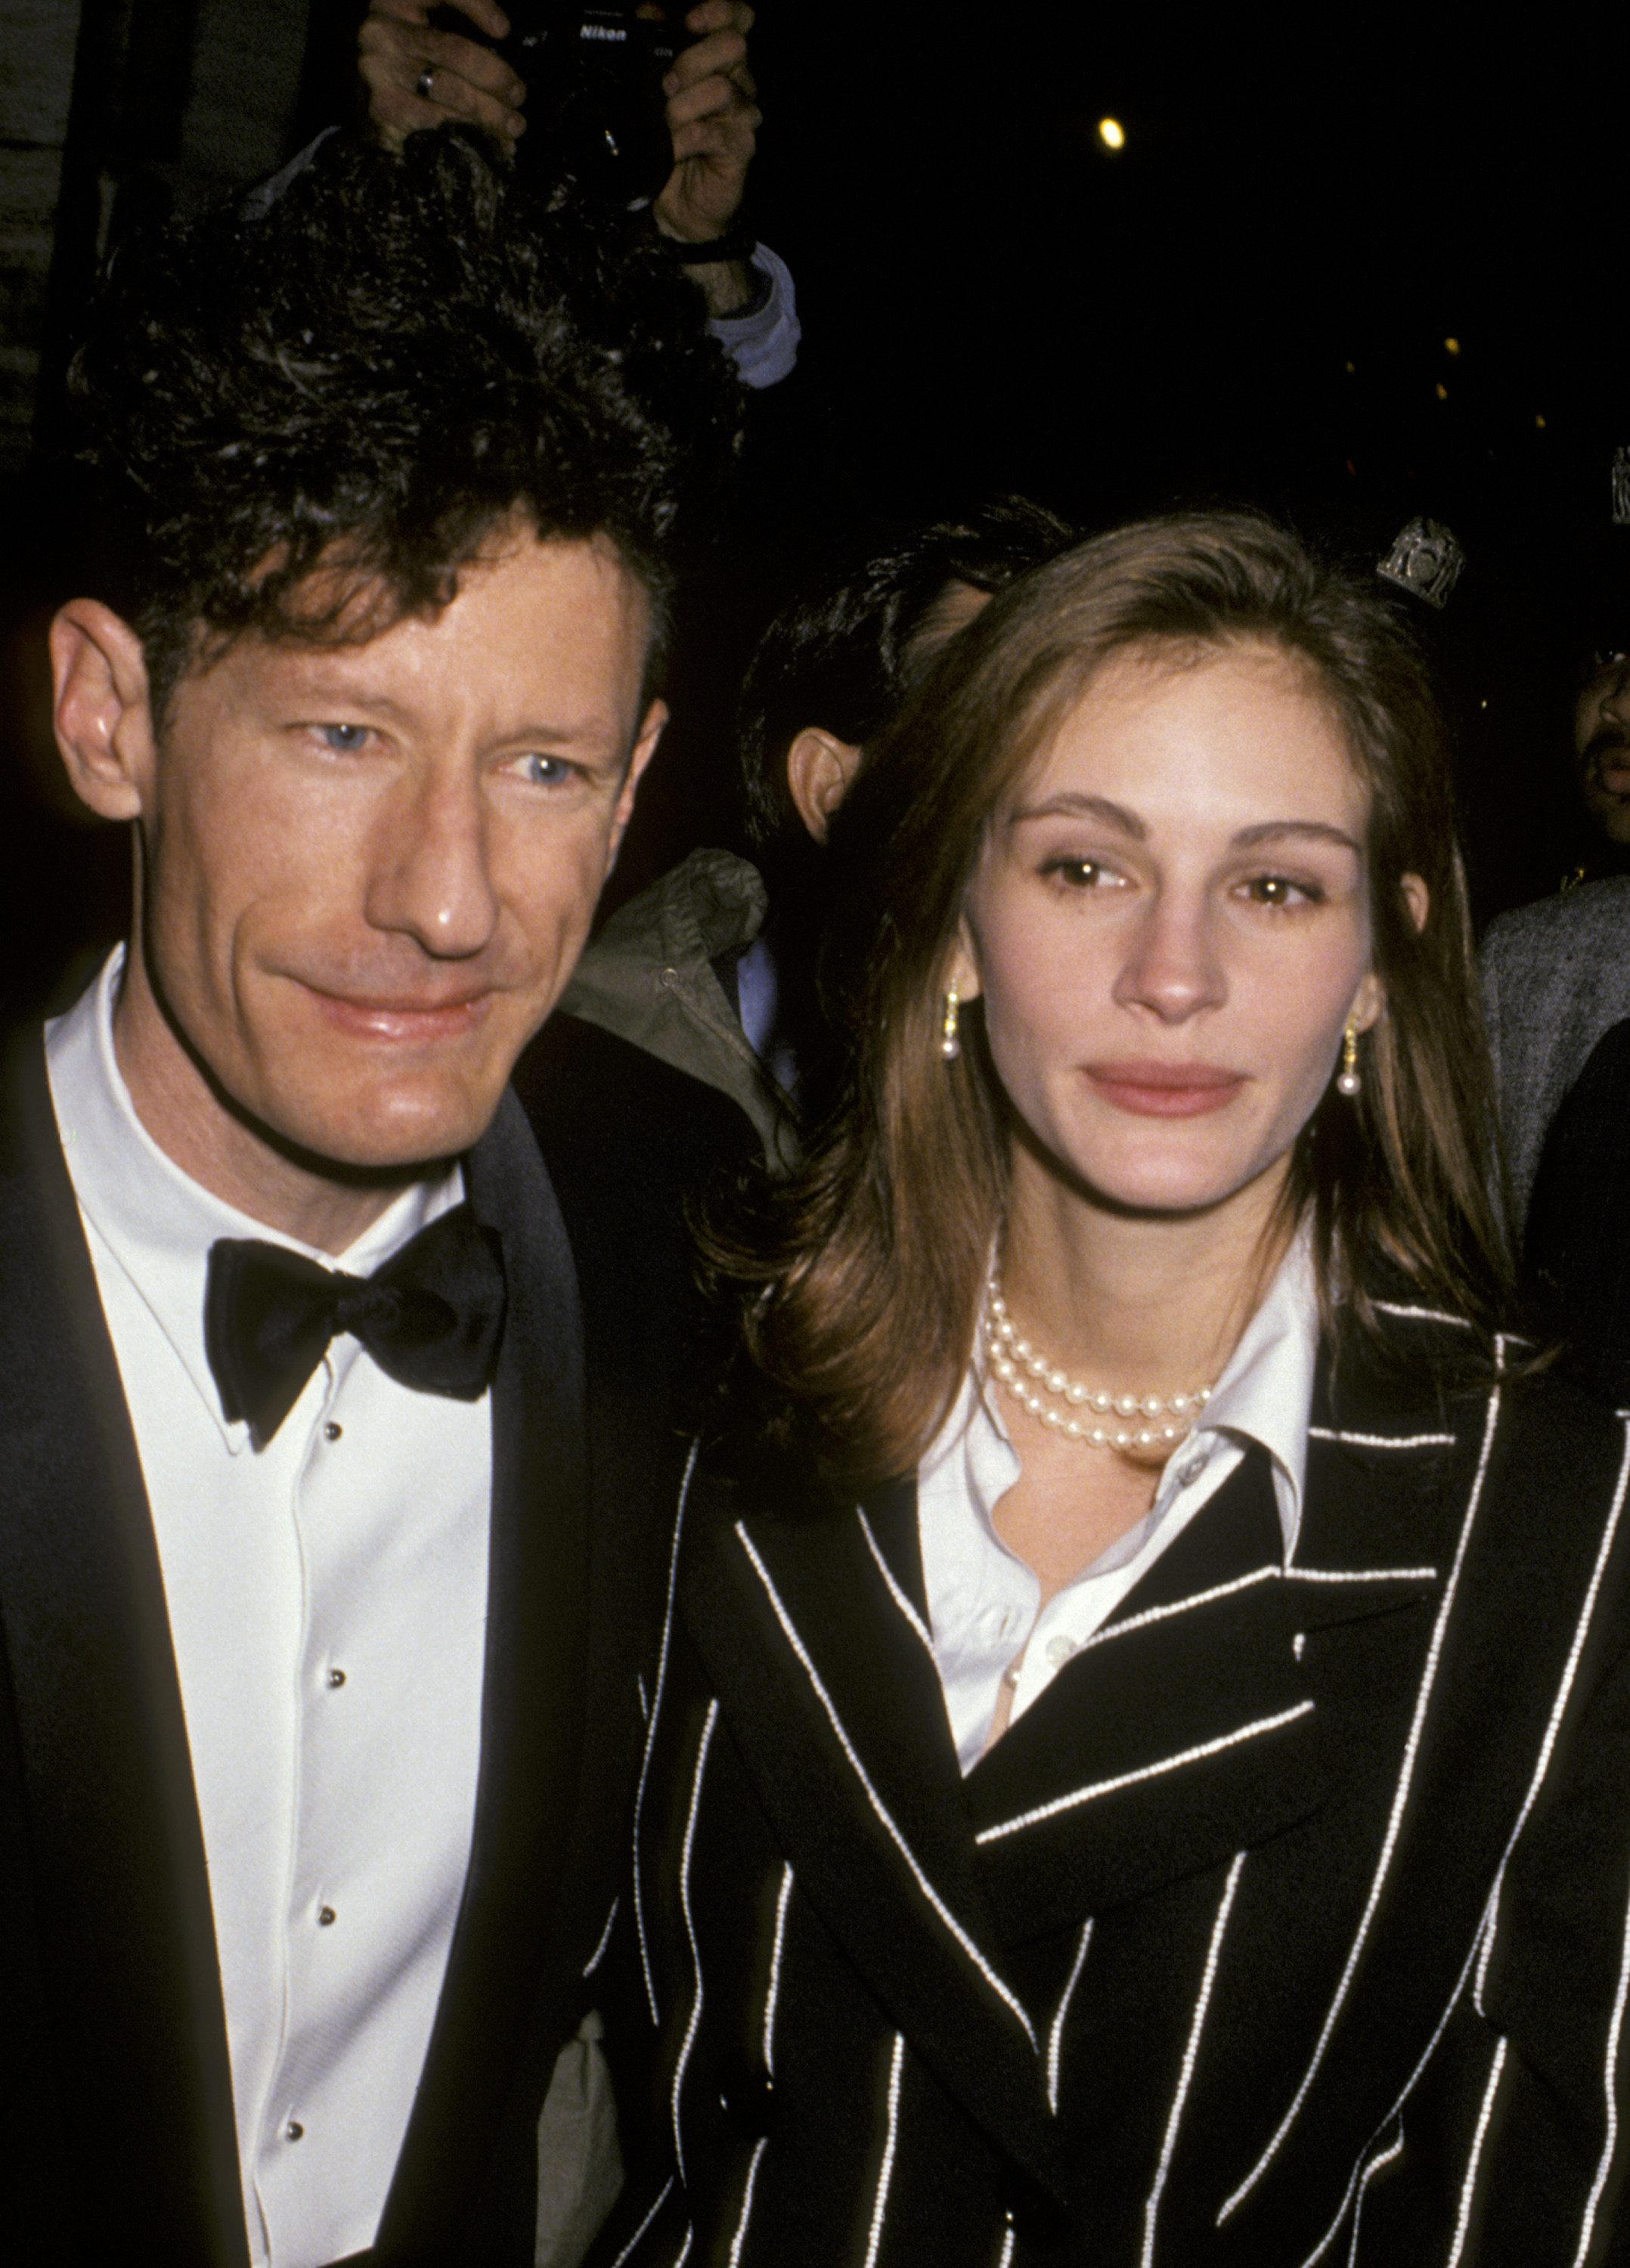 Lyle Lovett and Julia Roberts arrive at the Avery Fisher Hall